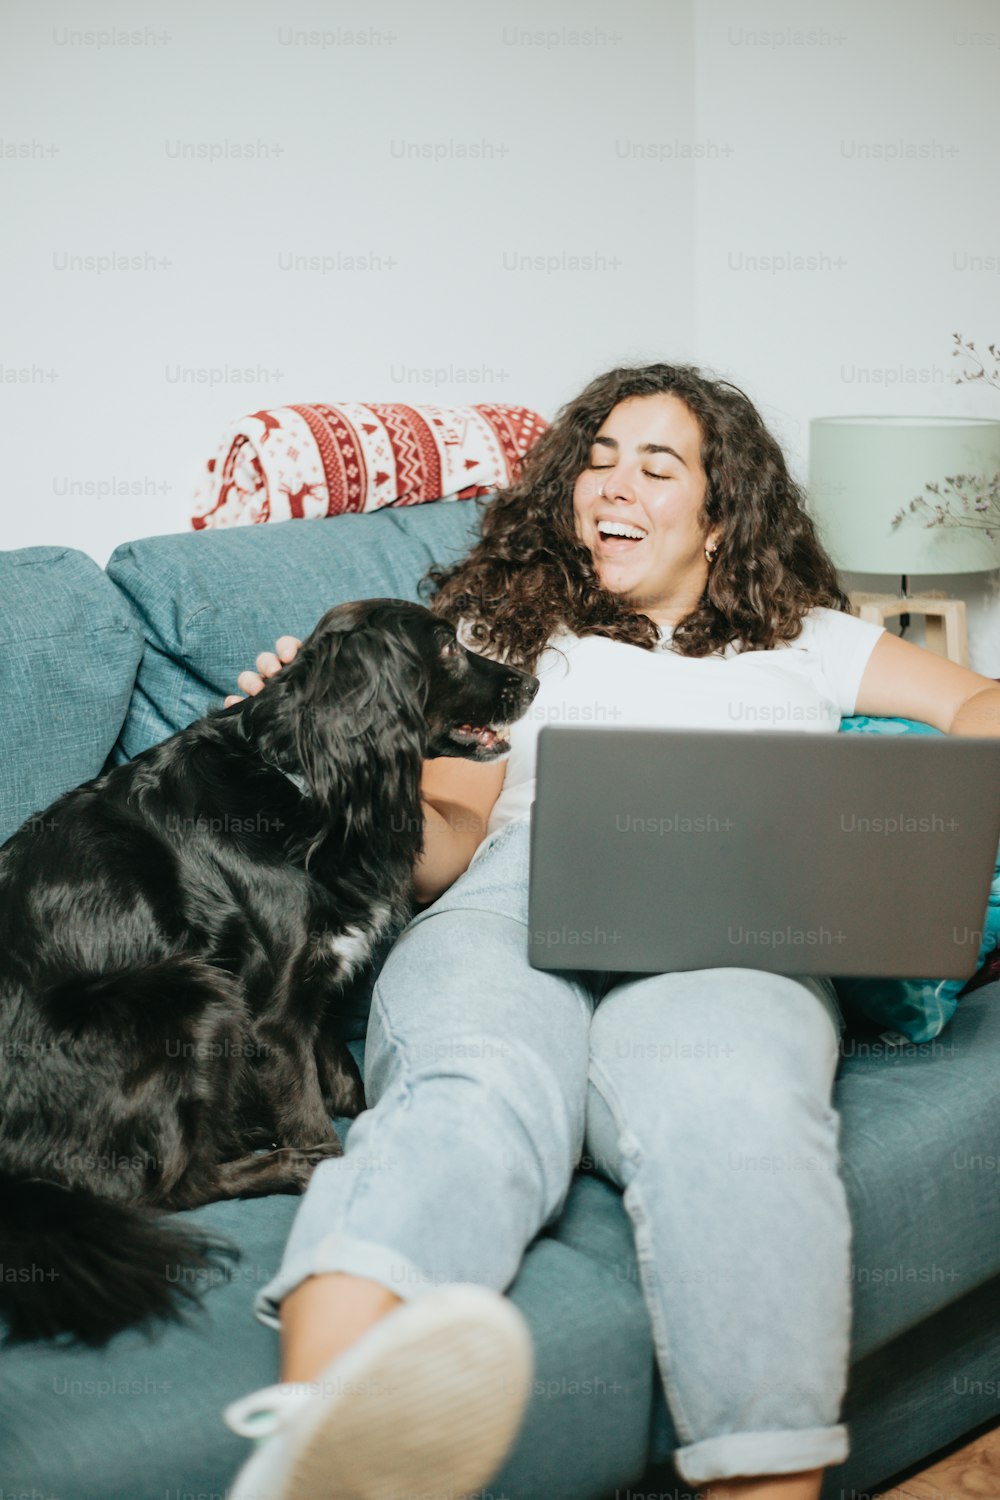 a woman sitting on a couch with a dog and a laptop